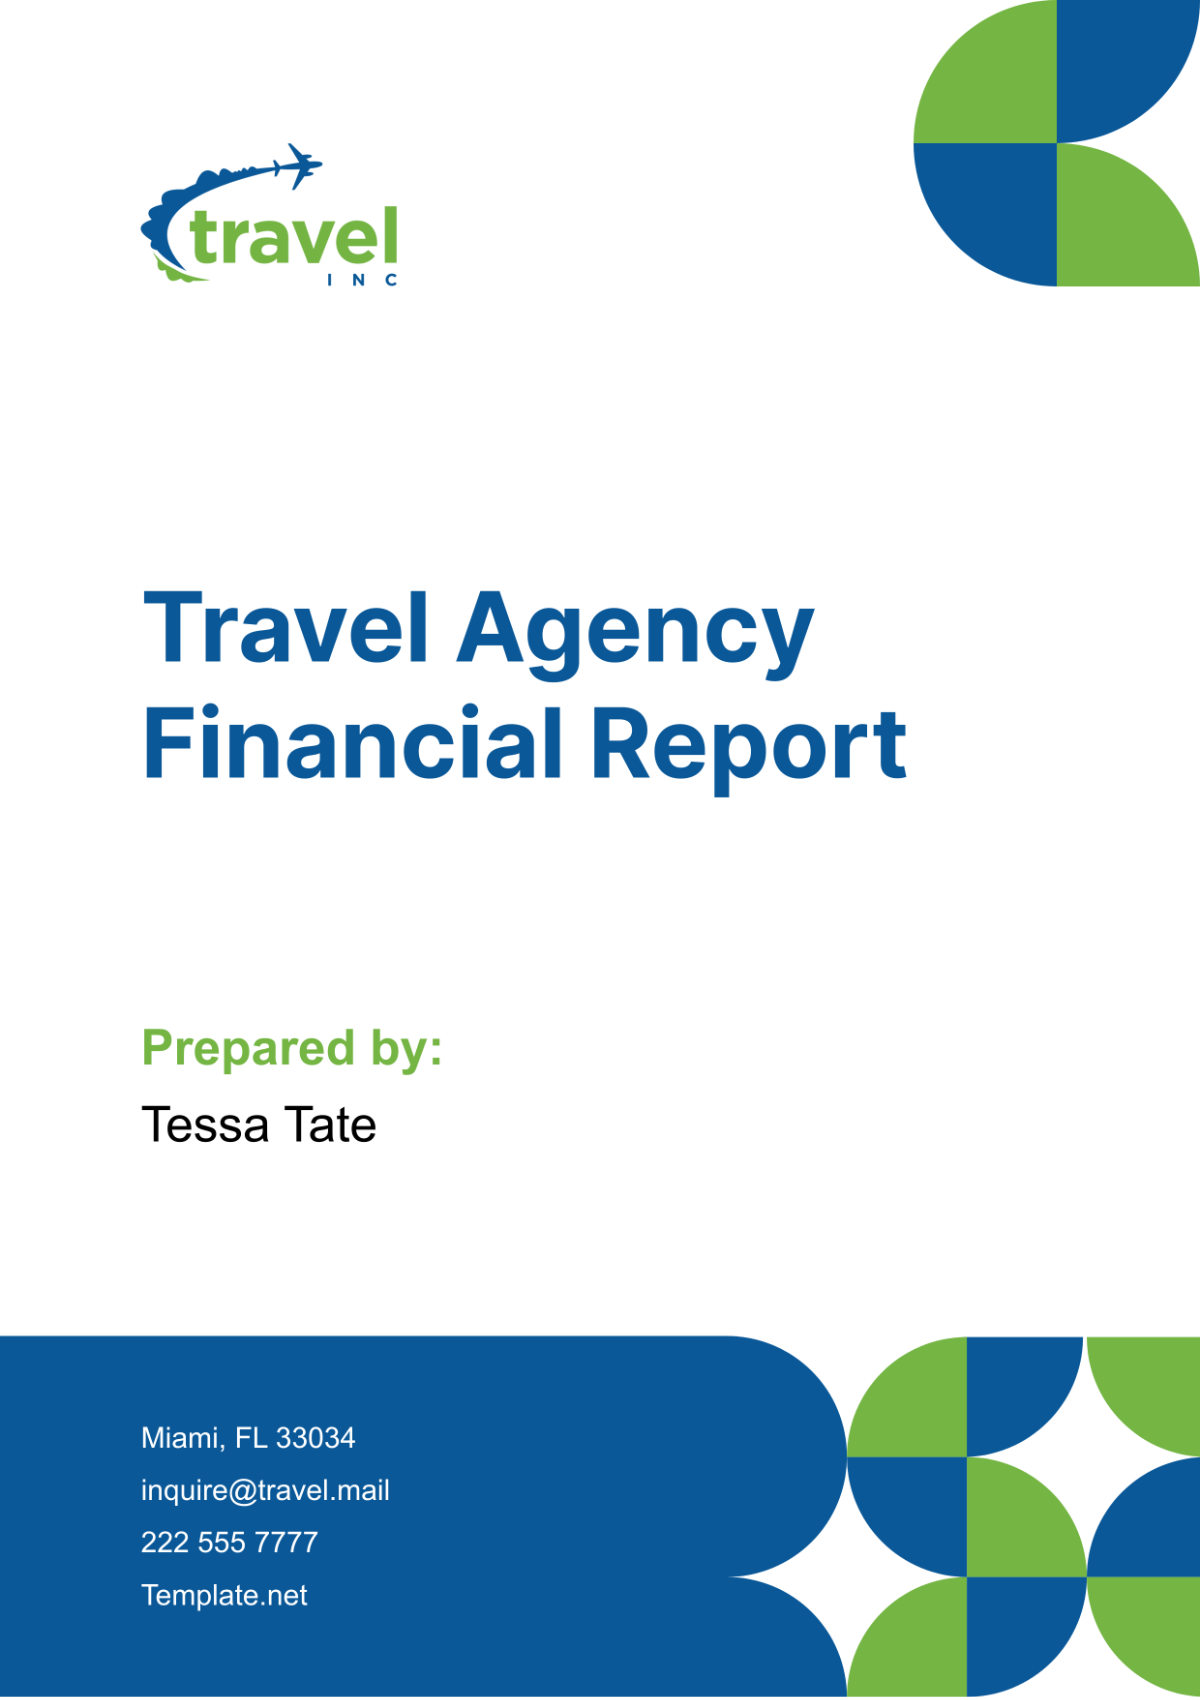 Travel Agency Financial Report Template